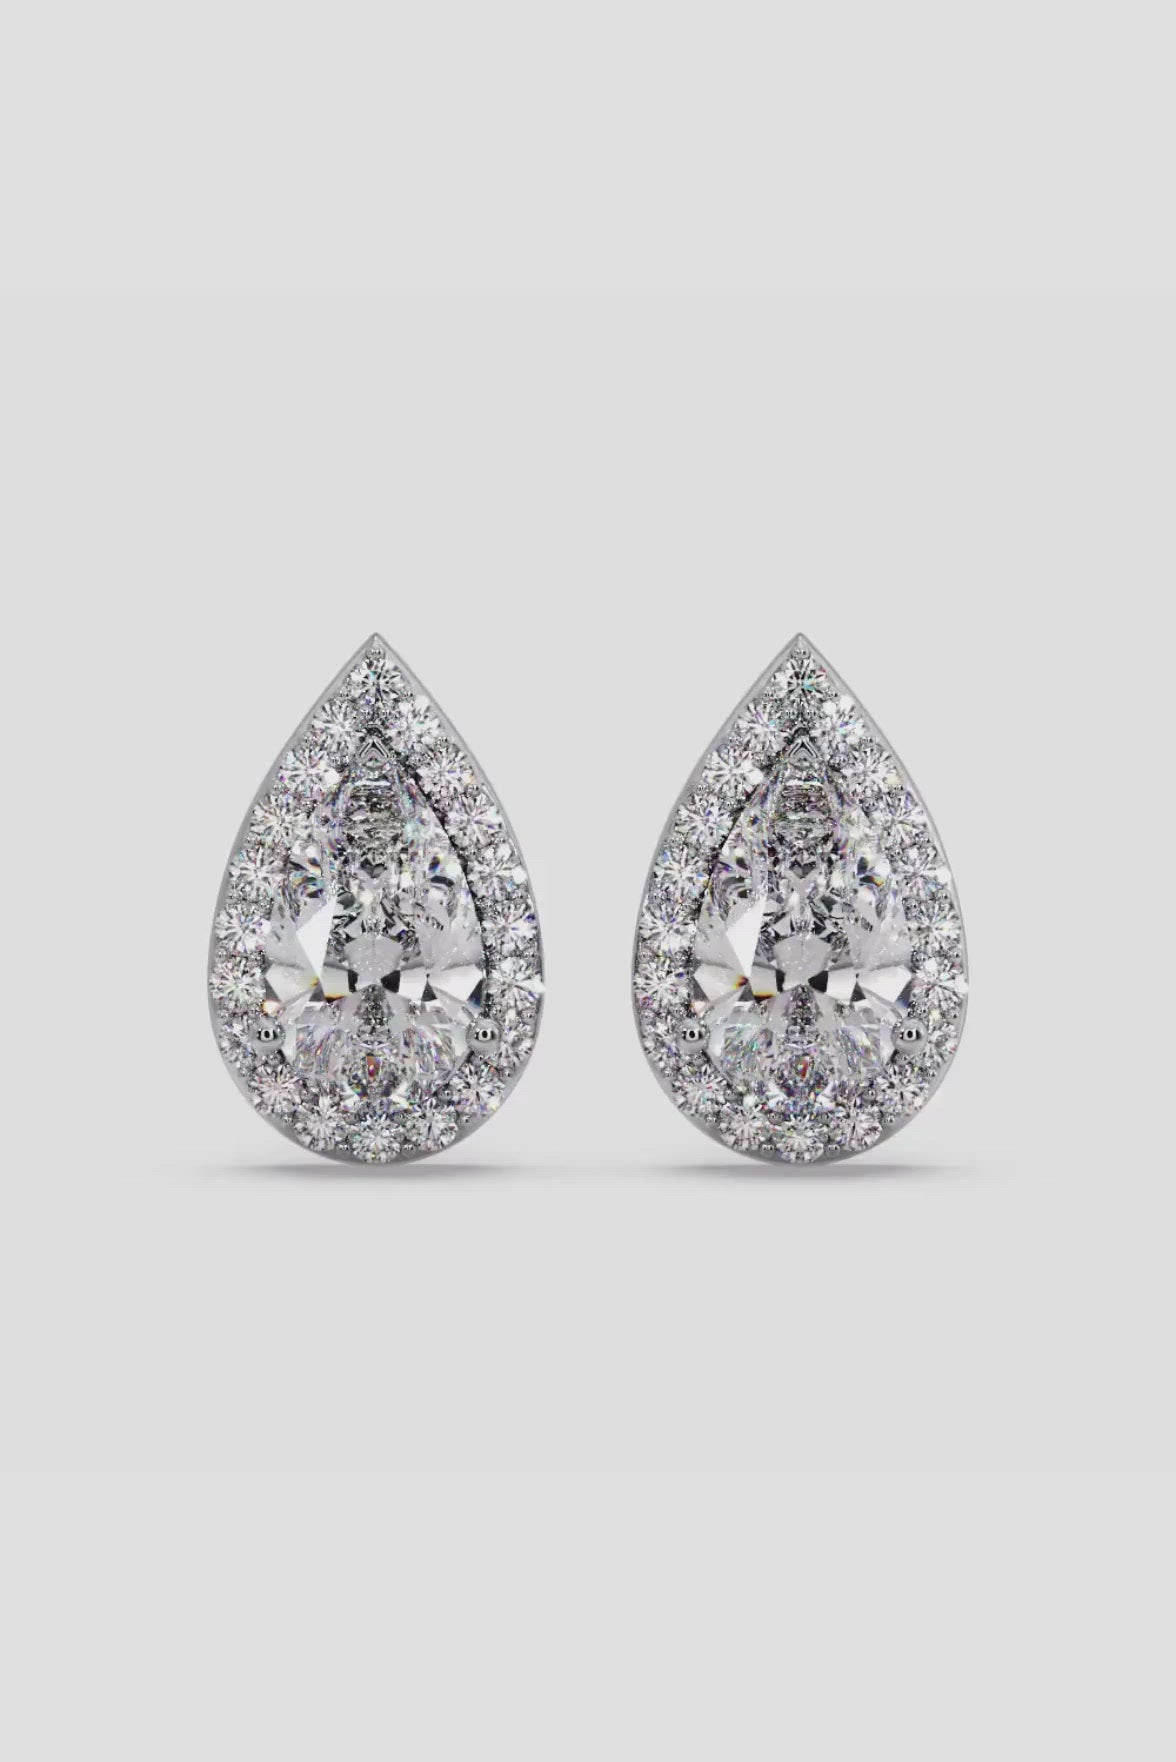 2 ct Pear Solitaire Halo Earrings